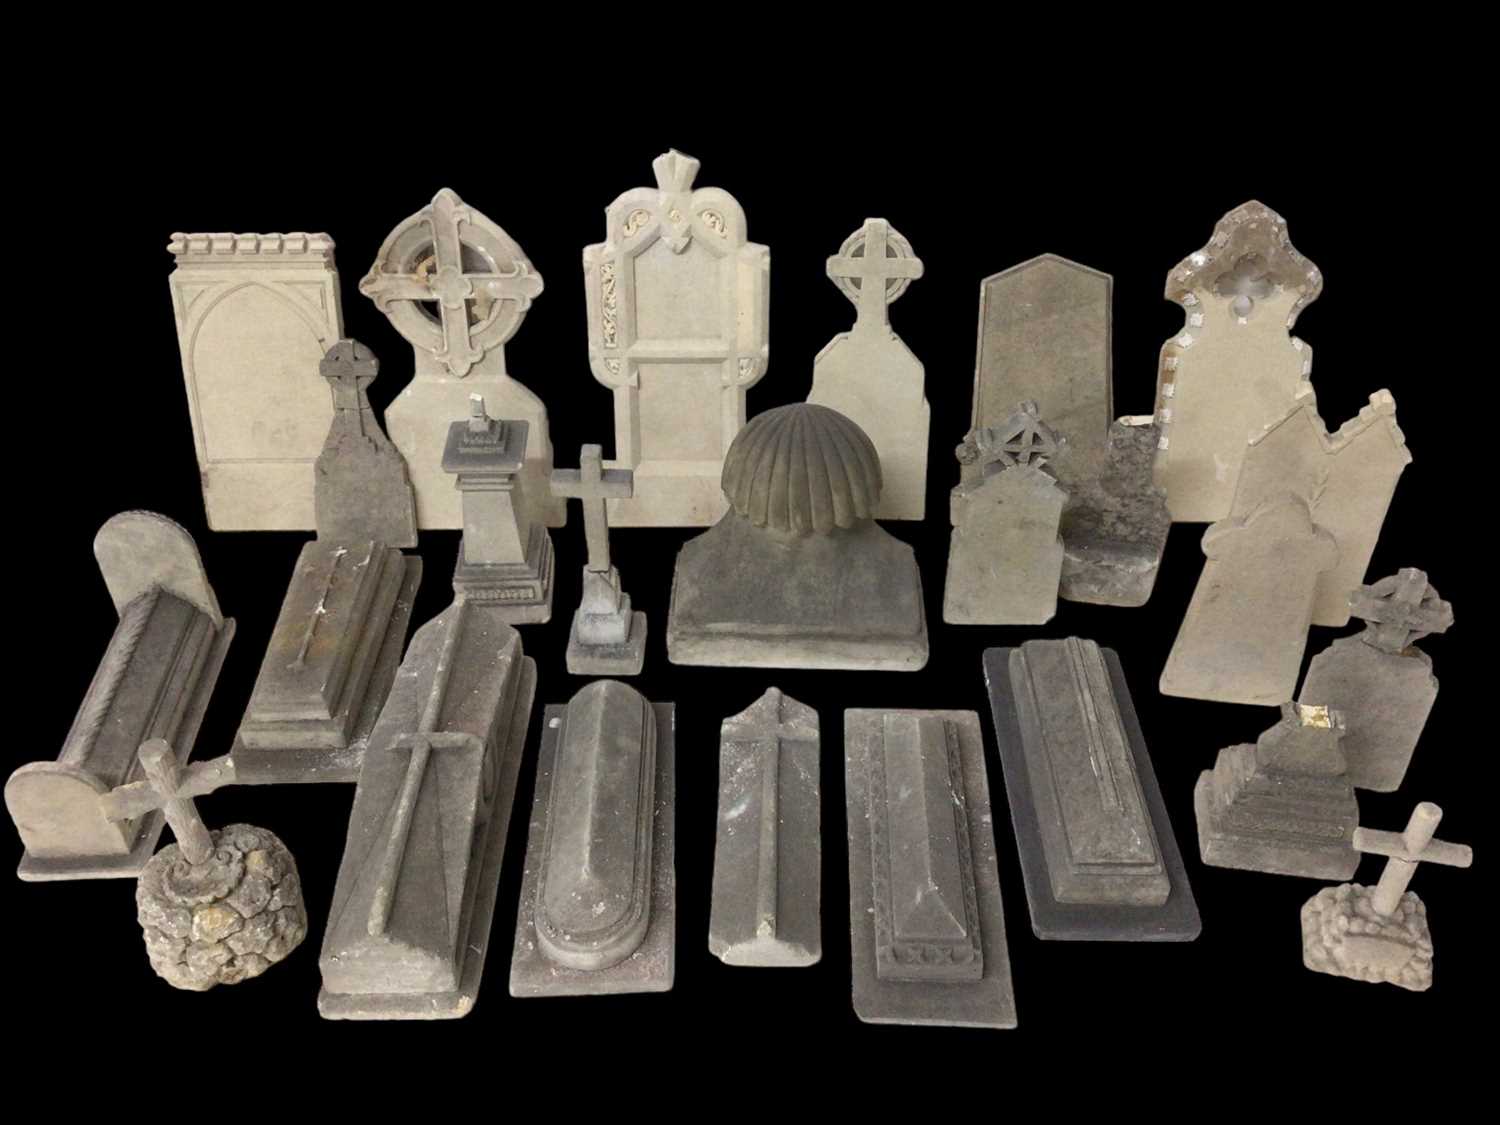 Lot 907 - Highly unusual large collection of stone models of gravestones